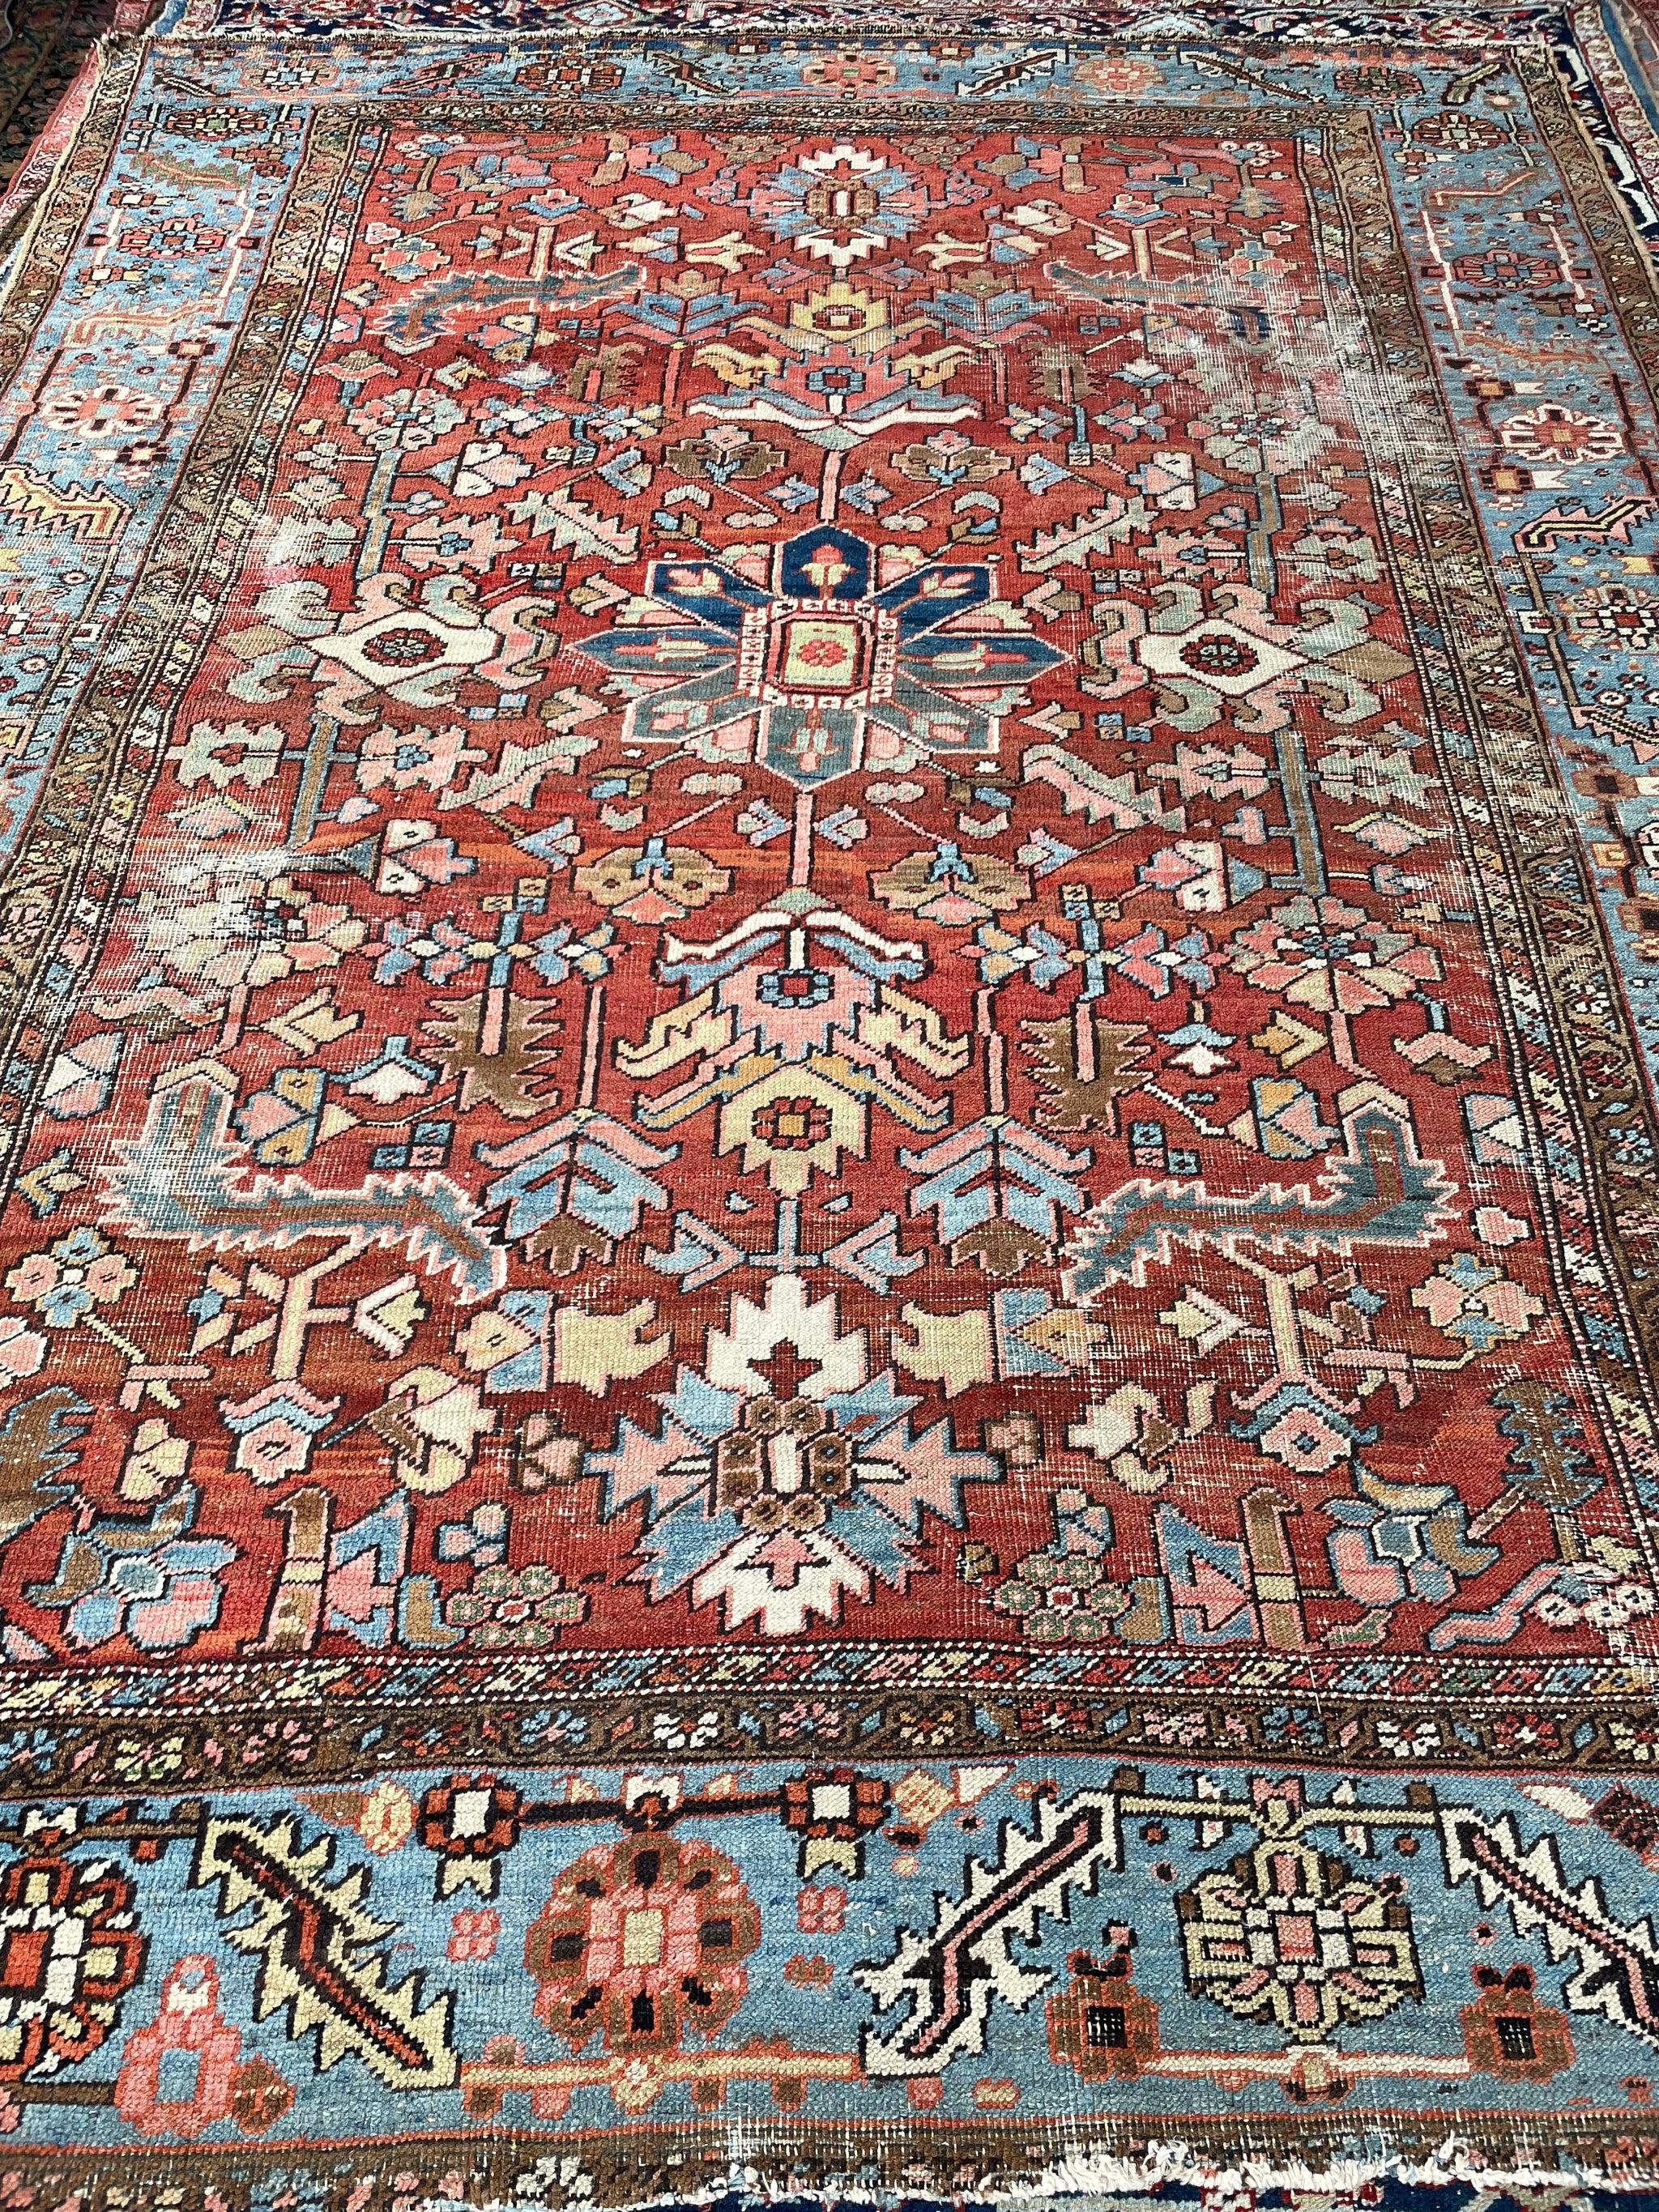 Gorgeous Blooming Jungle Antique rug Rusts, Sunflower, Ice Blue, Salmon, Pinks, Greens

About: It's funny because there is a new saying in the rug world; bad rugs photograph well, good rugs photograph poorly. Cameras help inferior rugs look better